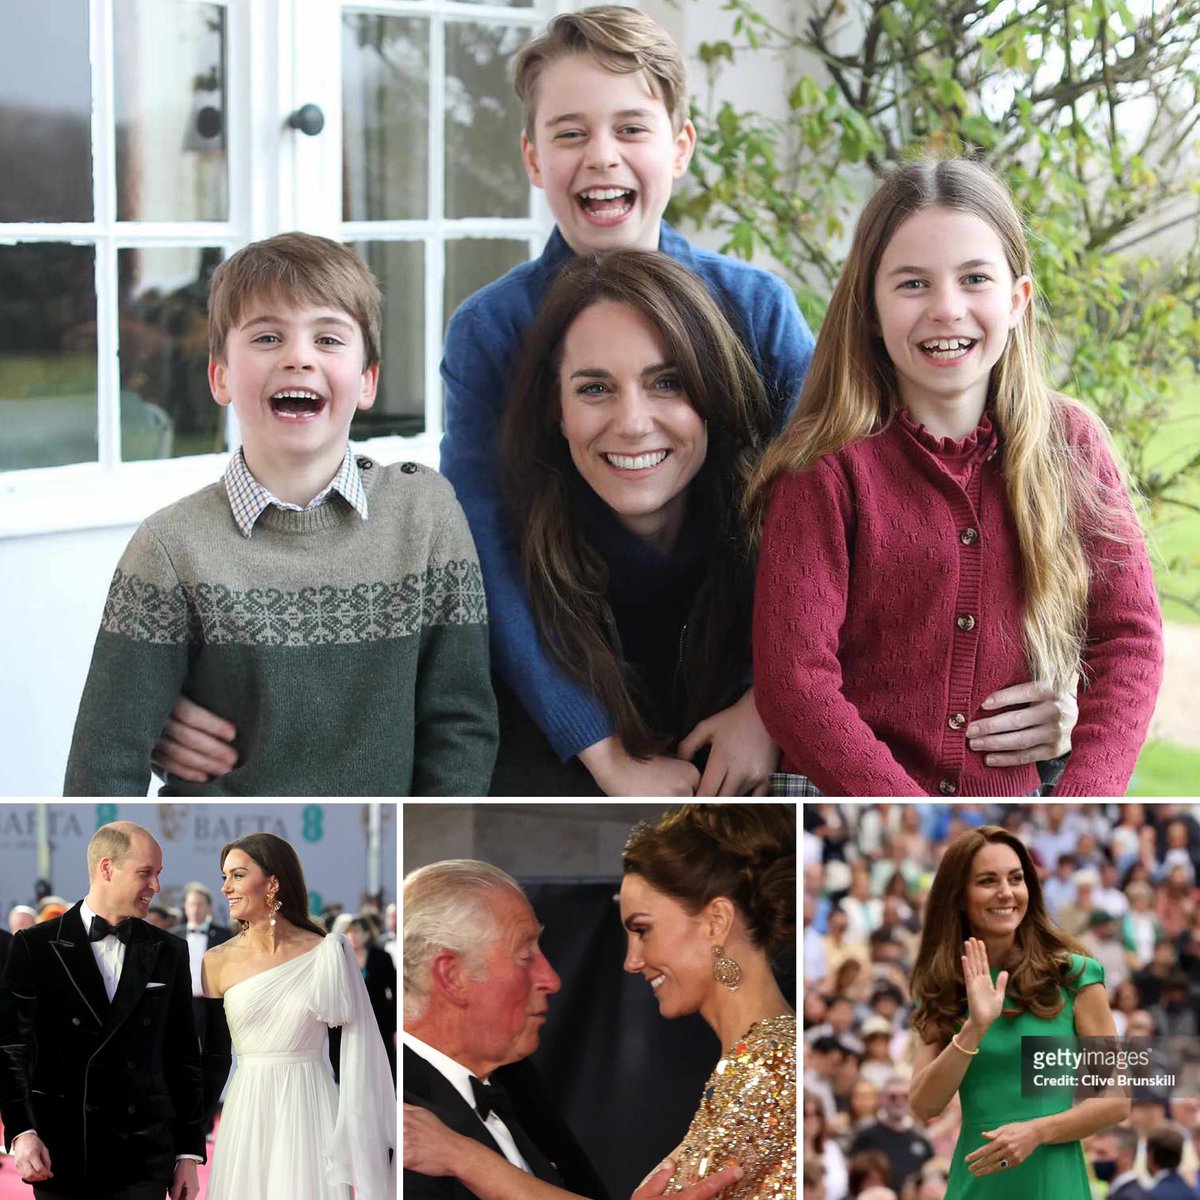 You are not alone Catherine. ❤️ You are loved and cherished by your children, your husband, your family and this whole nation. We are here for you and for William, George, Charlotte and Louis. ❤️ Sending healing vibes. ❤️‍🩹 #PrincessCatherine #PrincessofWales #WeLoveYouCatherine